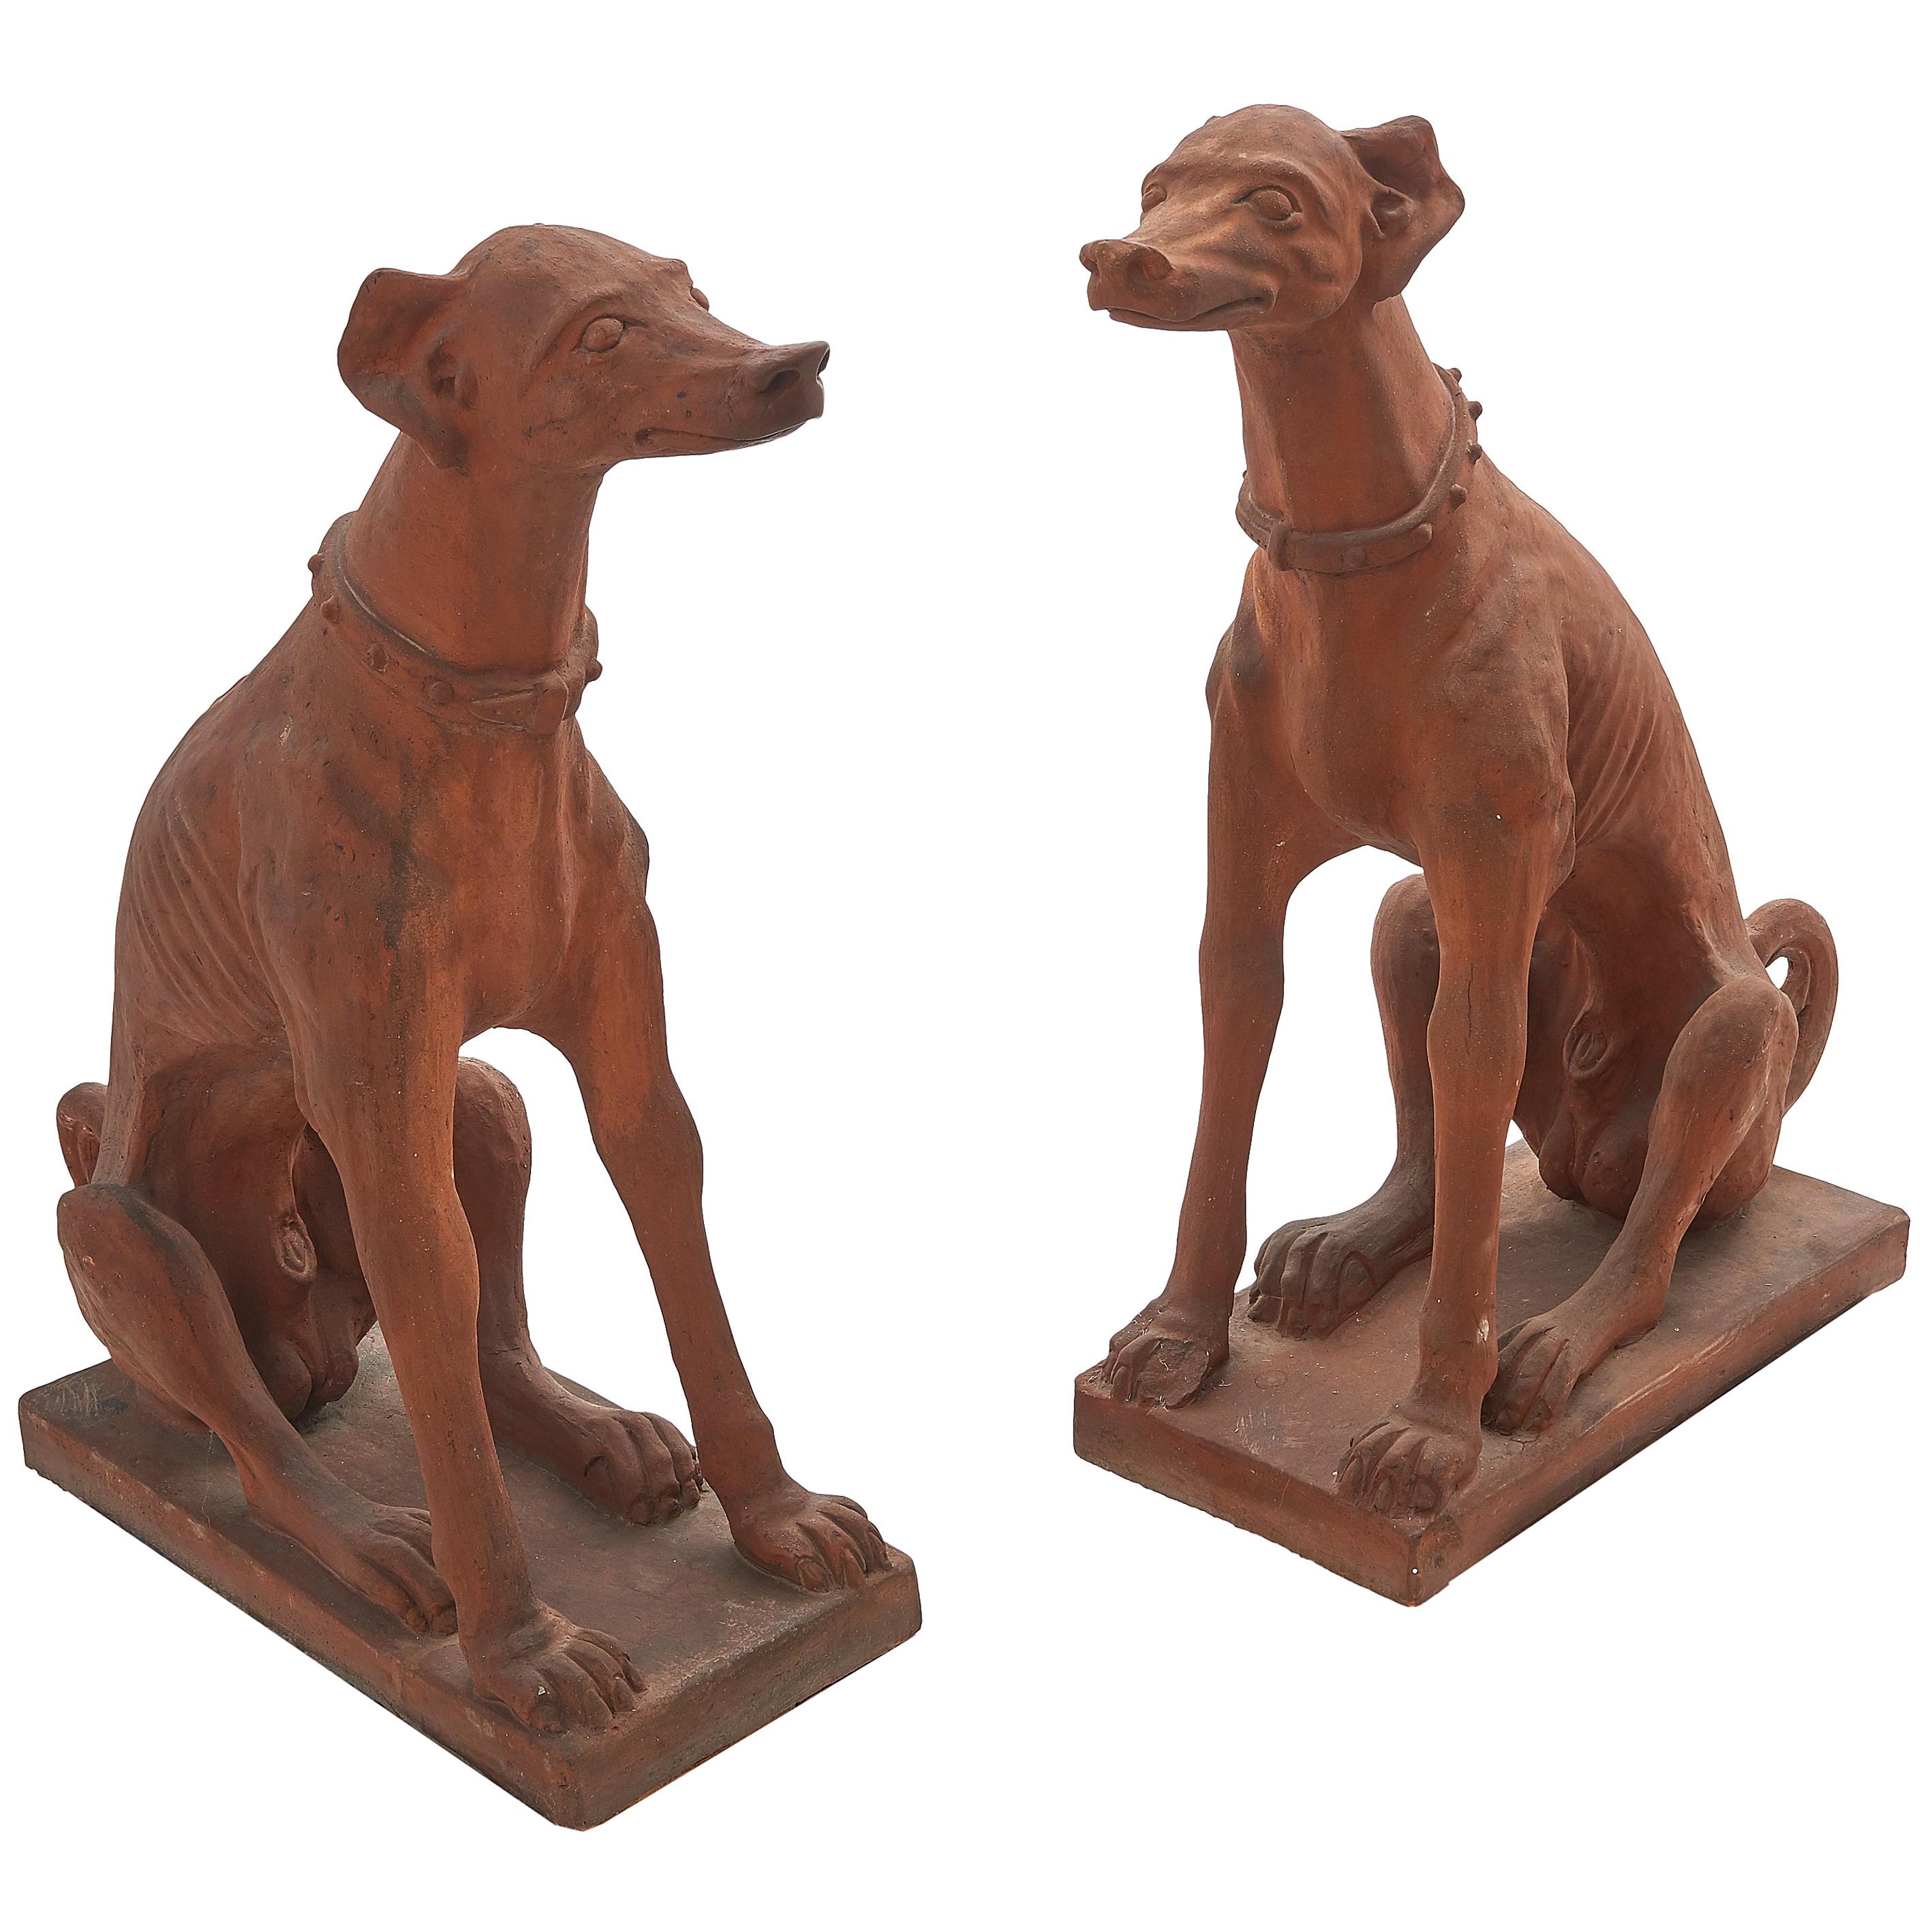 Pair of Italian Terracotta Statues of Whippets, circa 1860